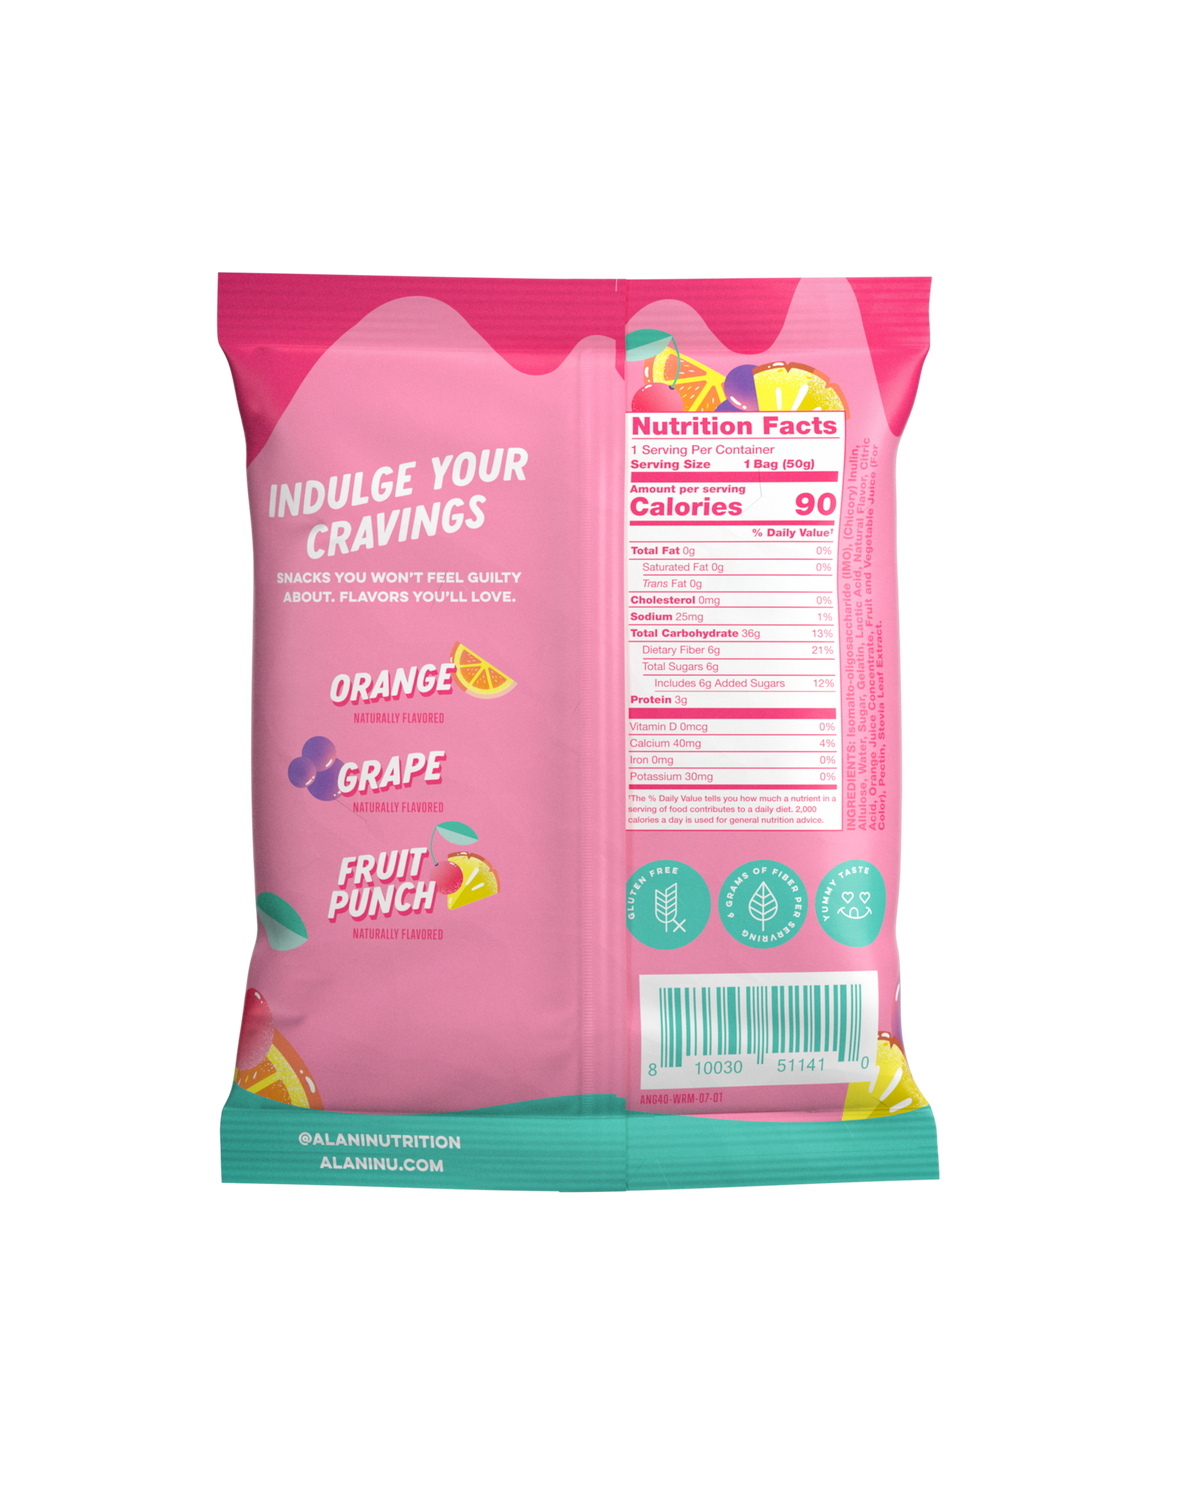 A back view of Gummi in Sour Gummy Worms flavor highlighting nutrition facts 